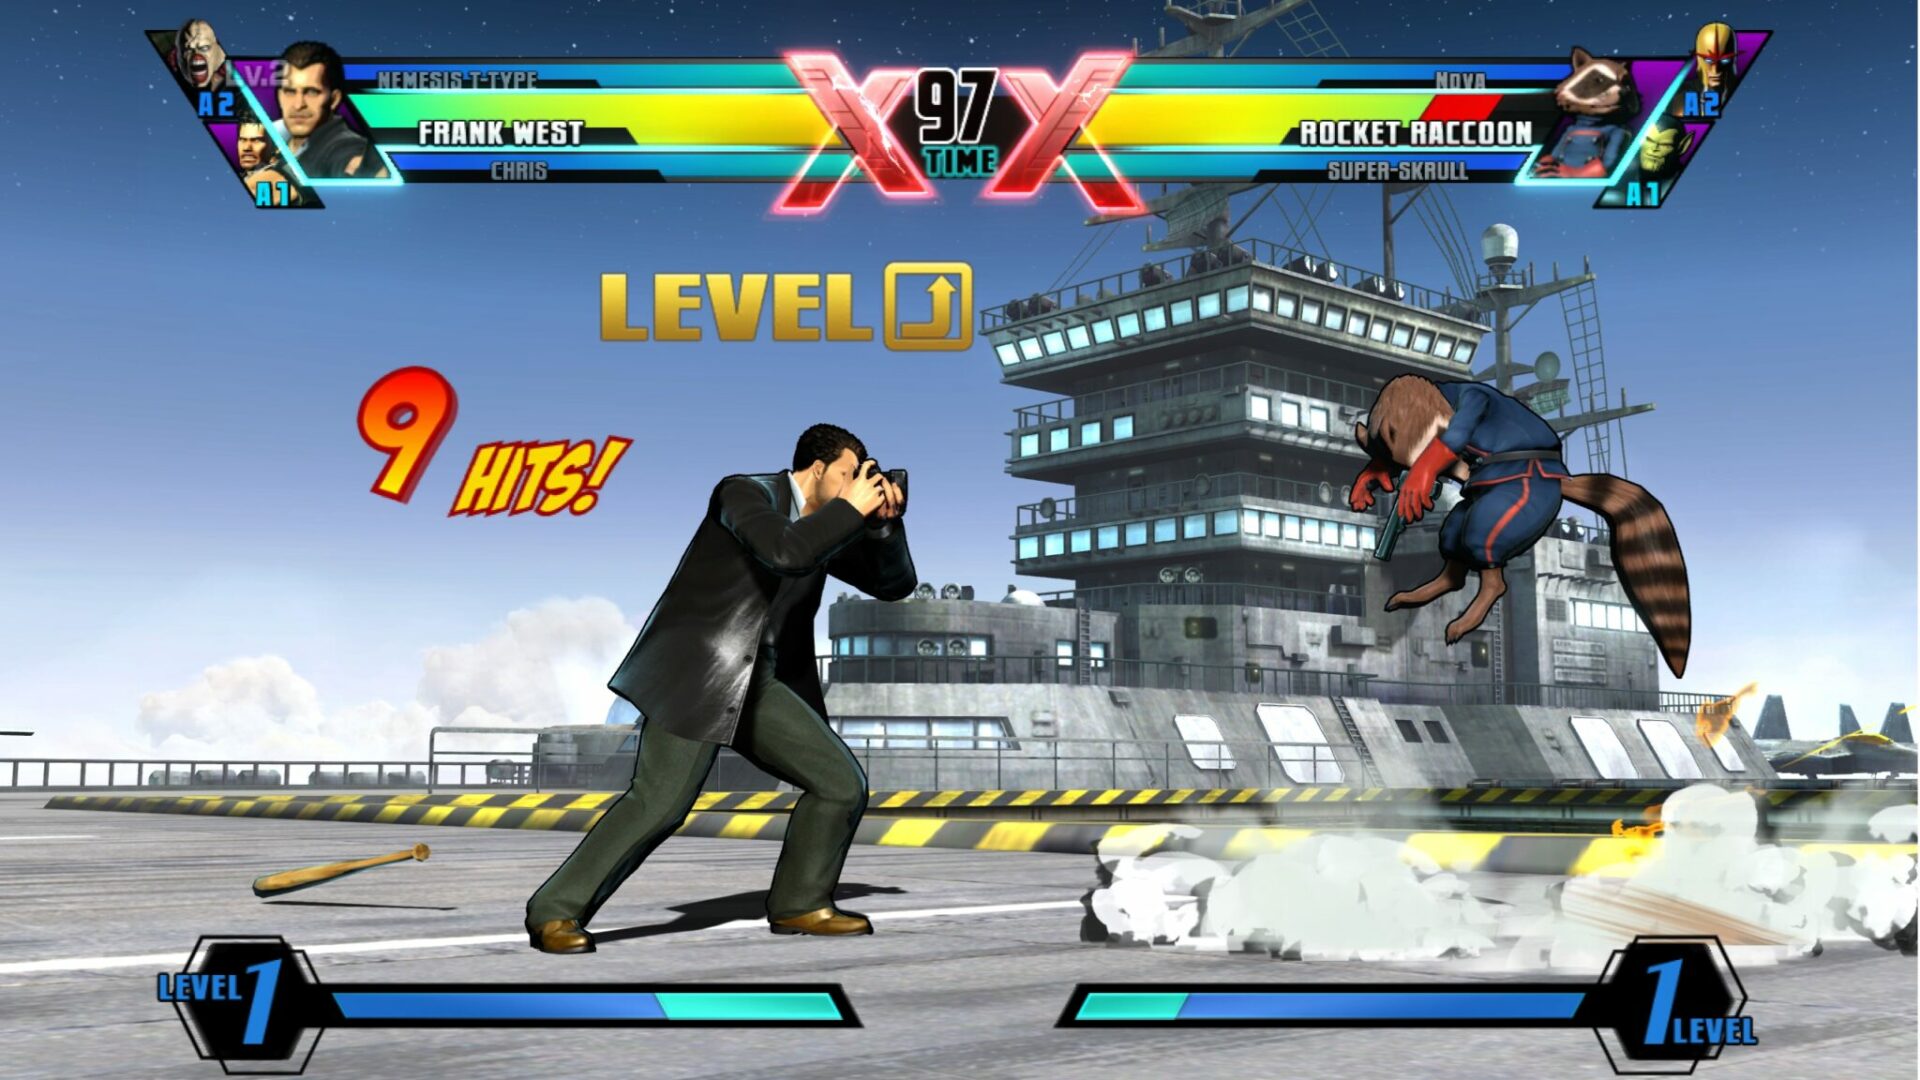 Ultimate Marvel vs Capcom 3 Xbox One and PC Release Date Announced